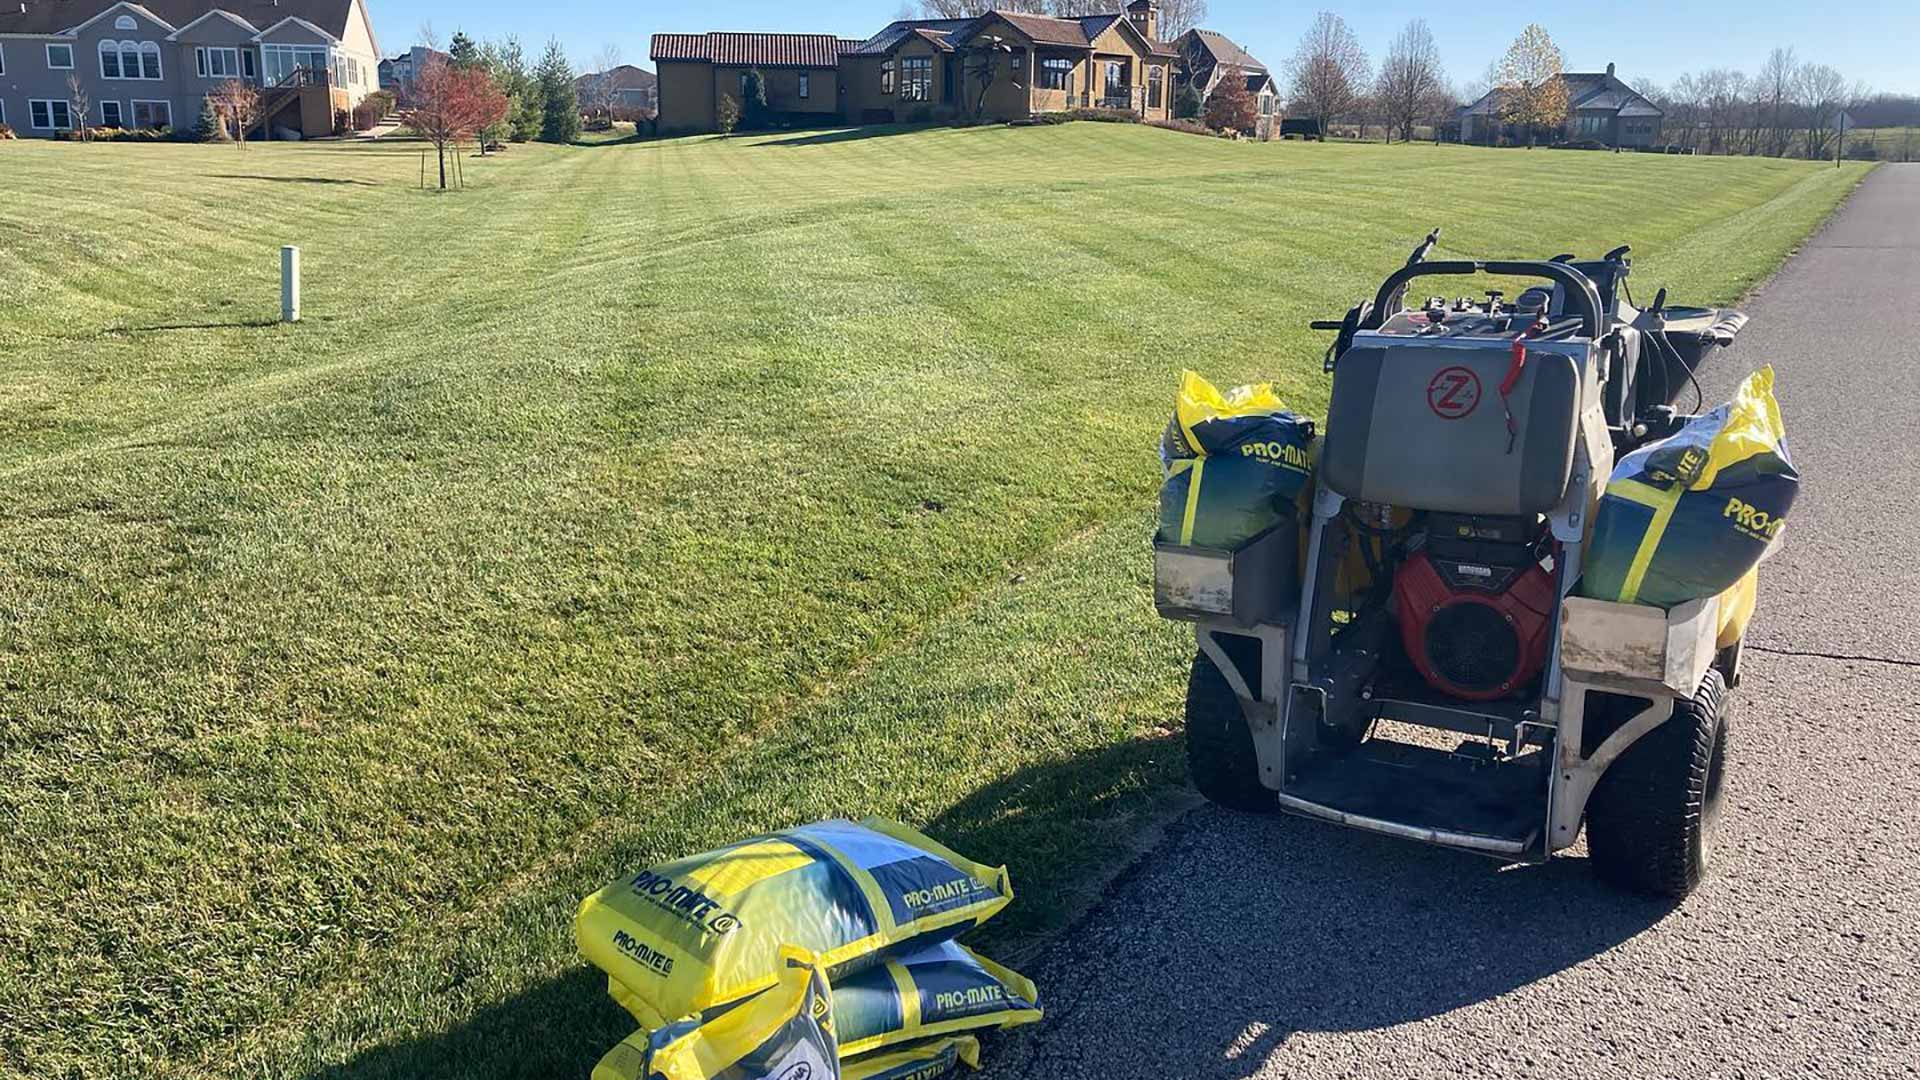 Lawn care equipment next to a green lawn in Olathe, KS.